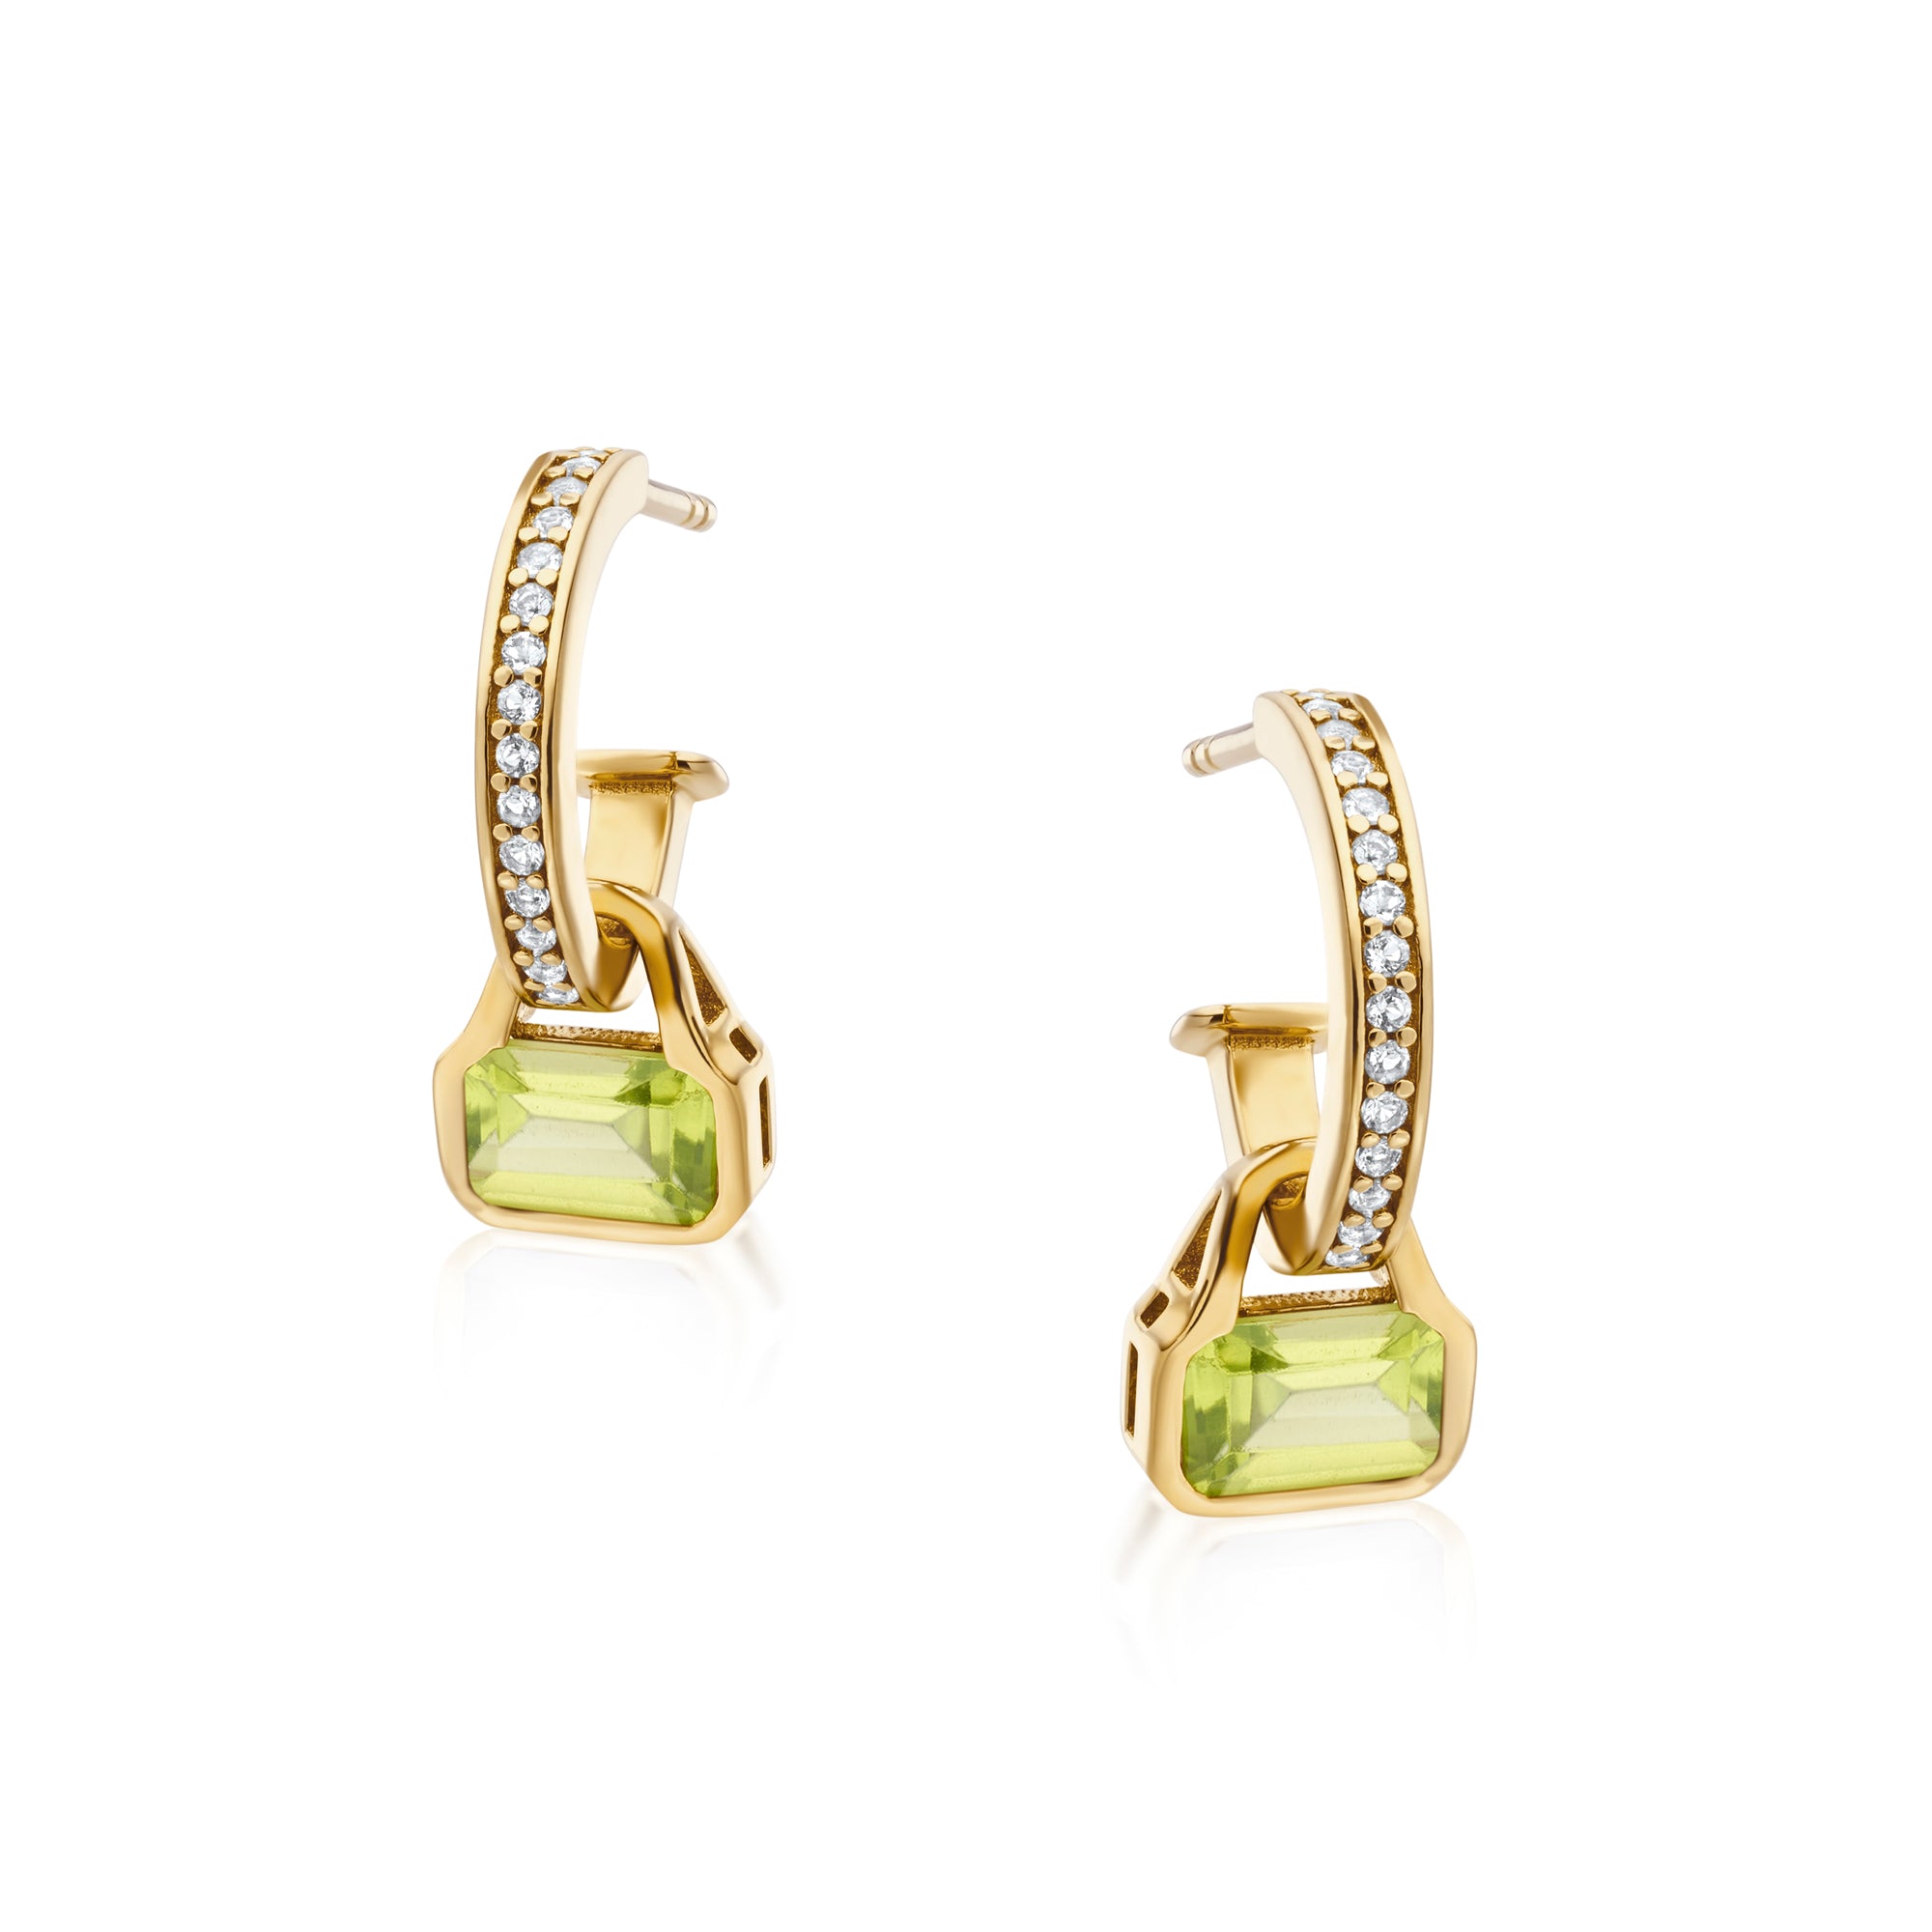 Peridot Charms (August) on White Topaz Hoops